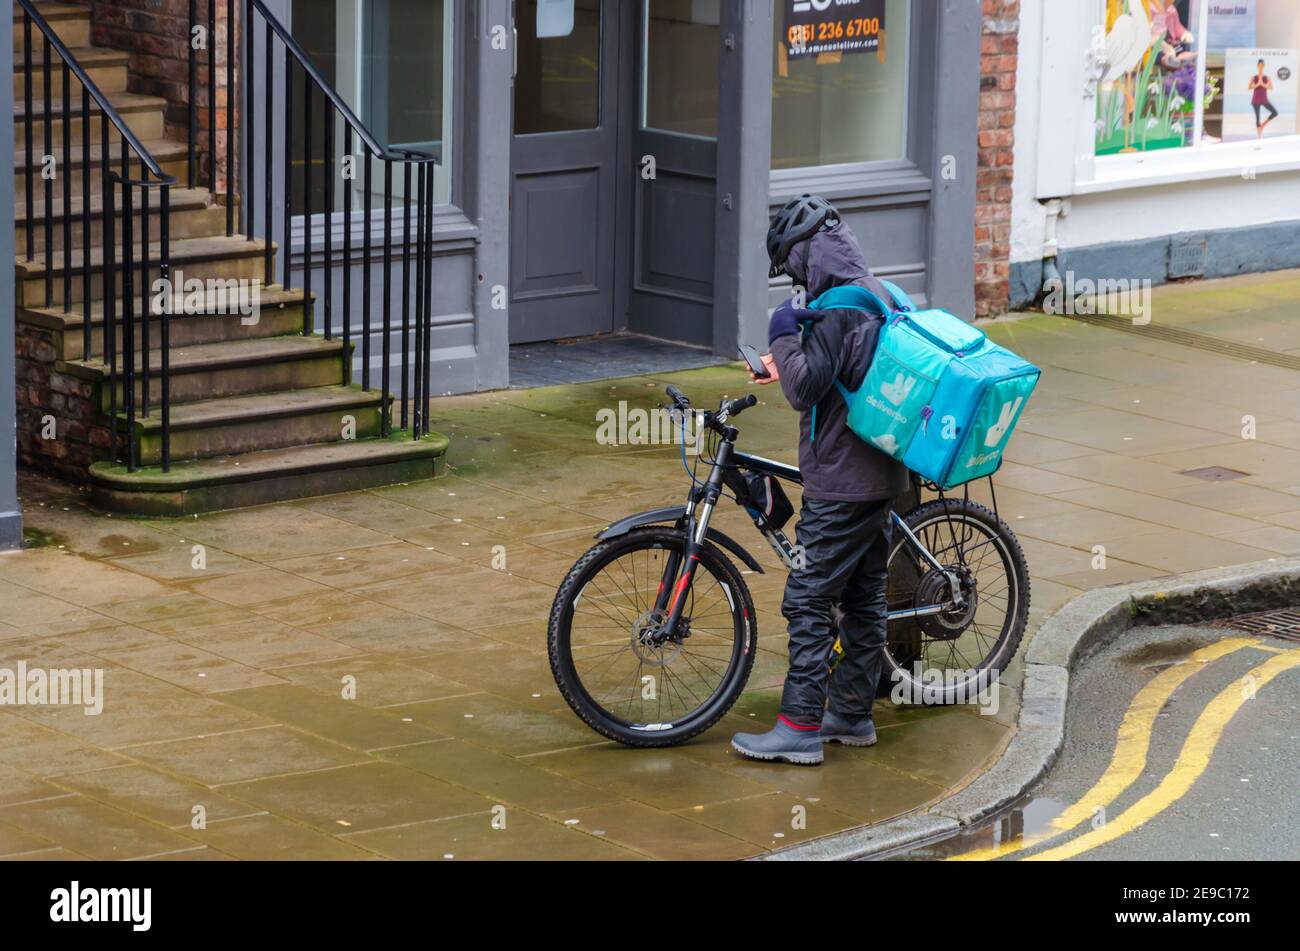 Chester; UK: Jan 29, 2021: A Deliveroo rider checks his mobile phone before starting a delivery. Stock Photo